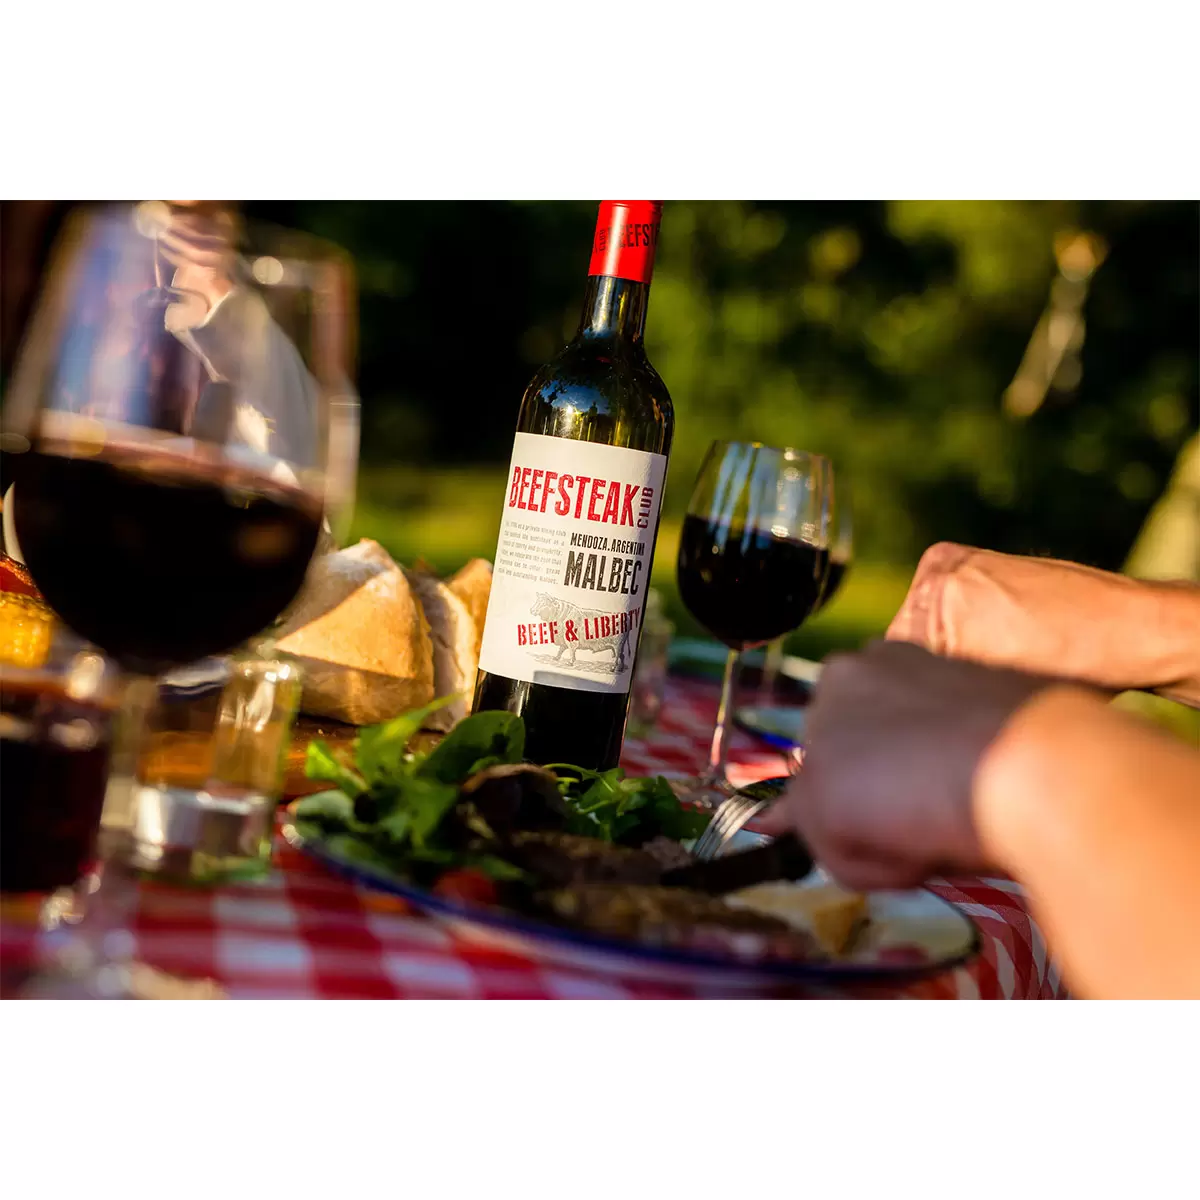 Image of bottle of wine in park